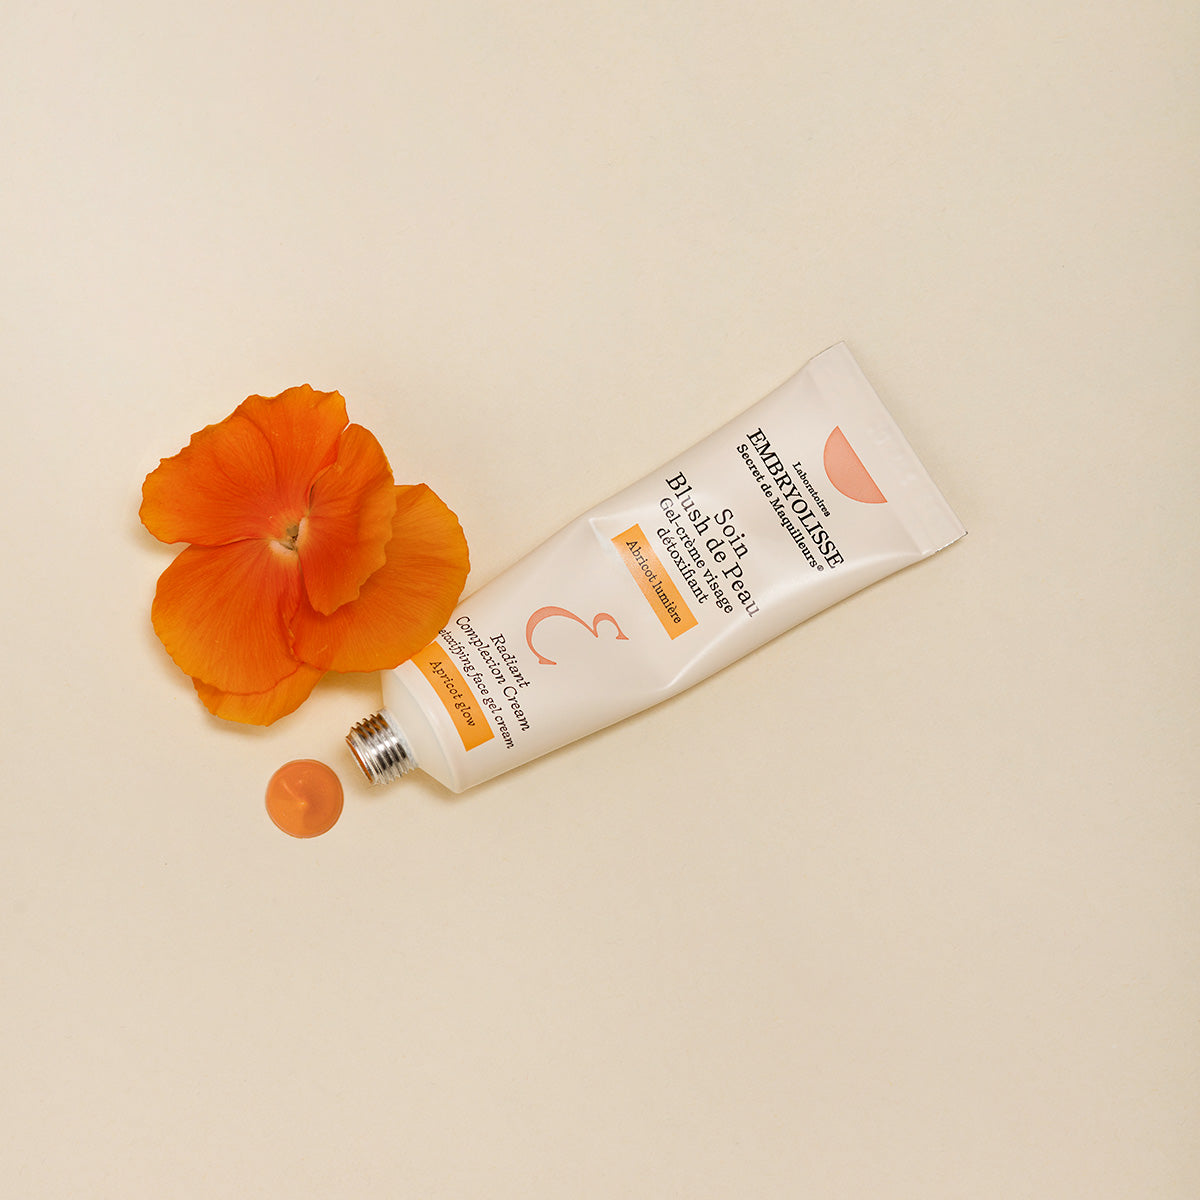 Radiant Complexion Cream - Apricot - Detox care for an immediate healthy glow - Embryolisse shade - 